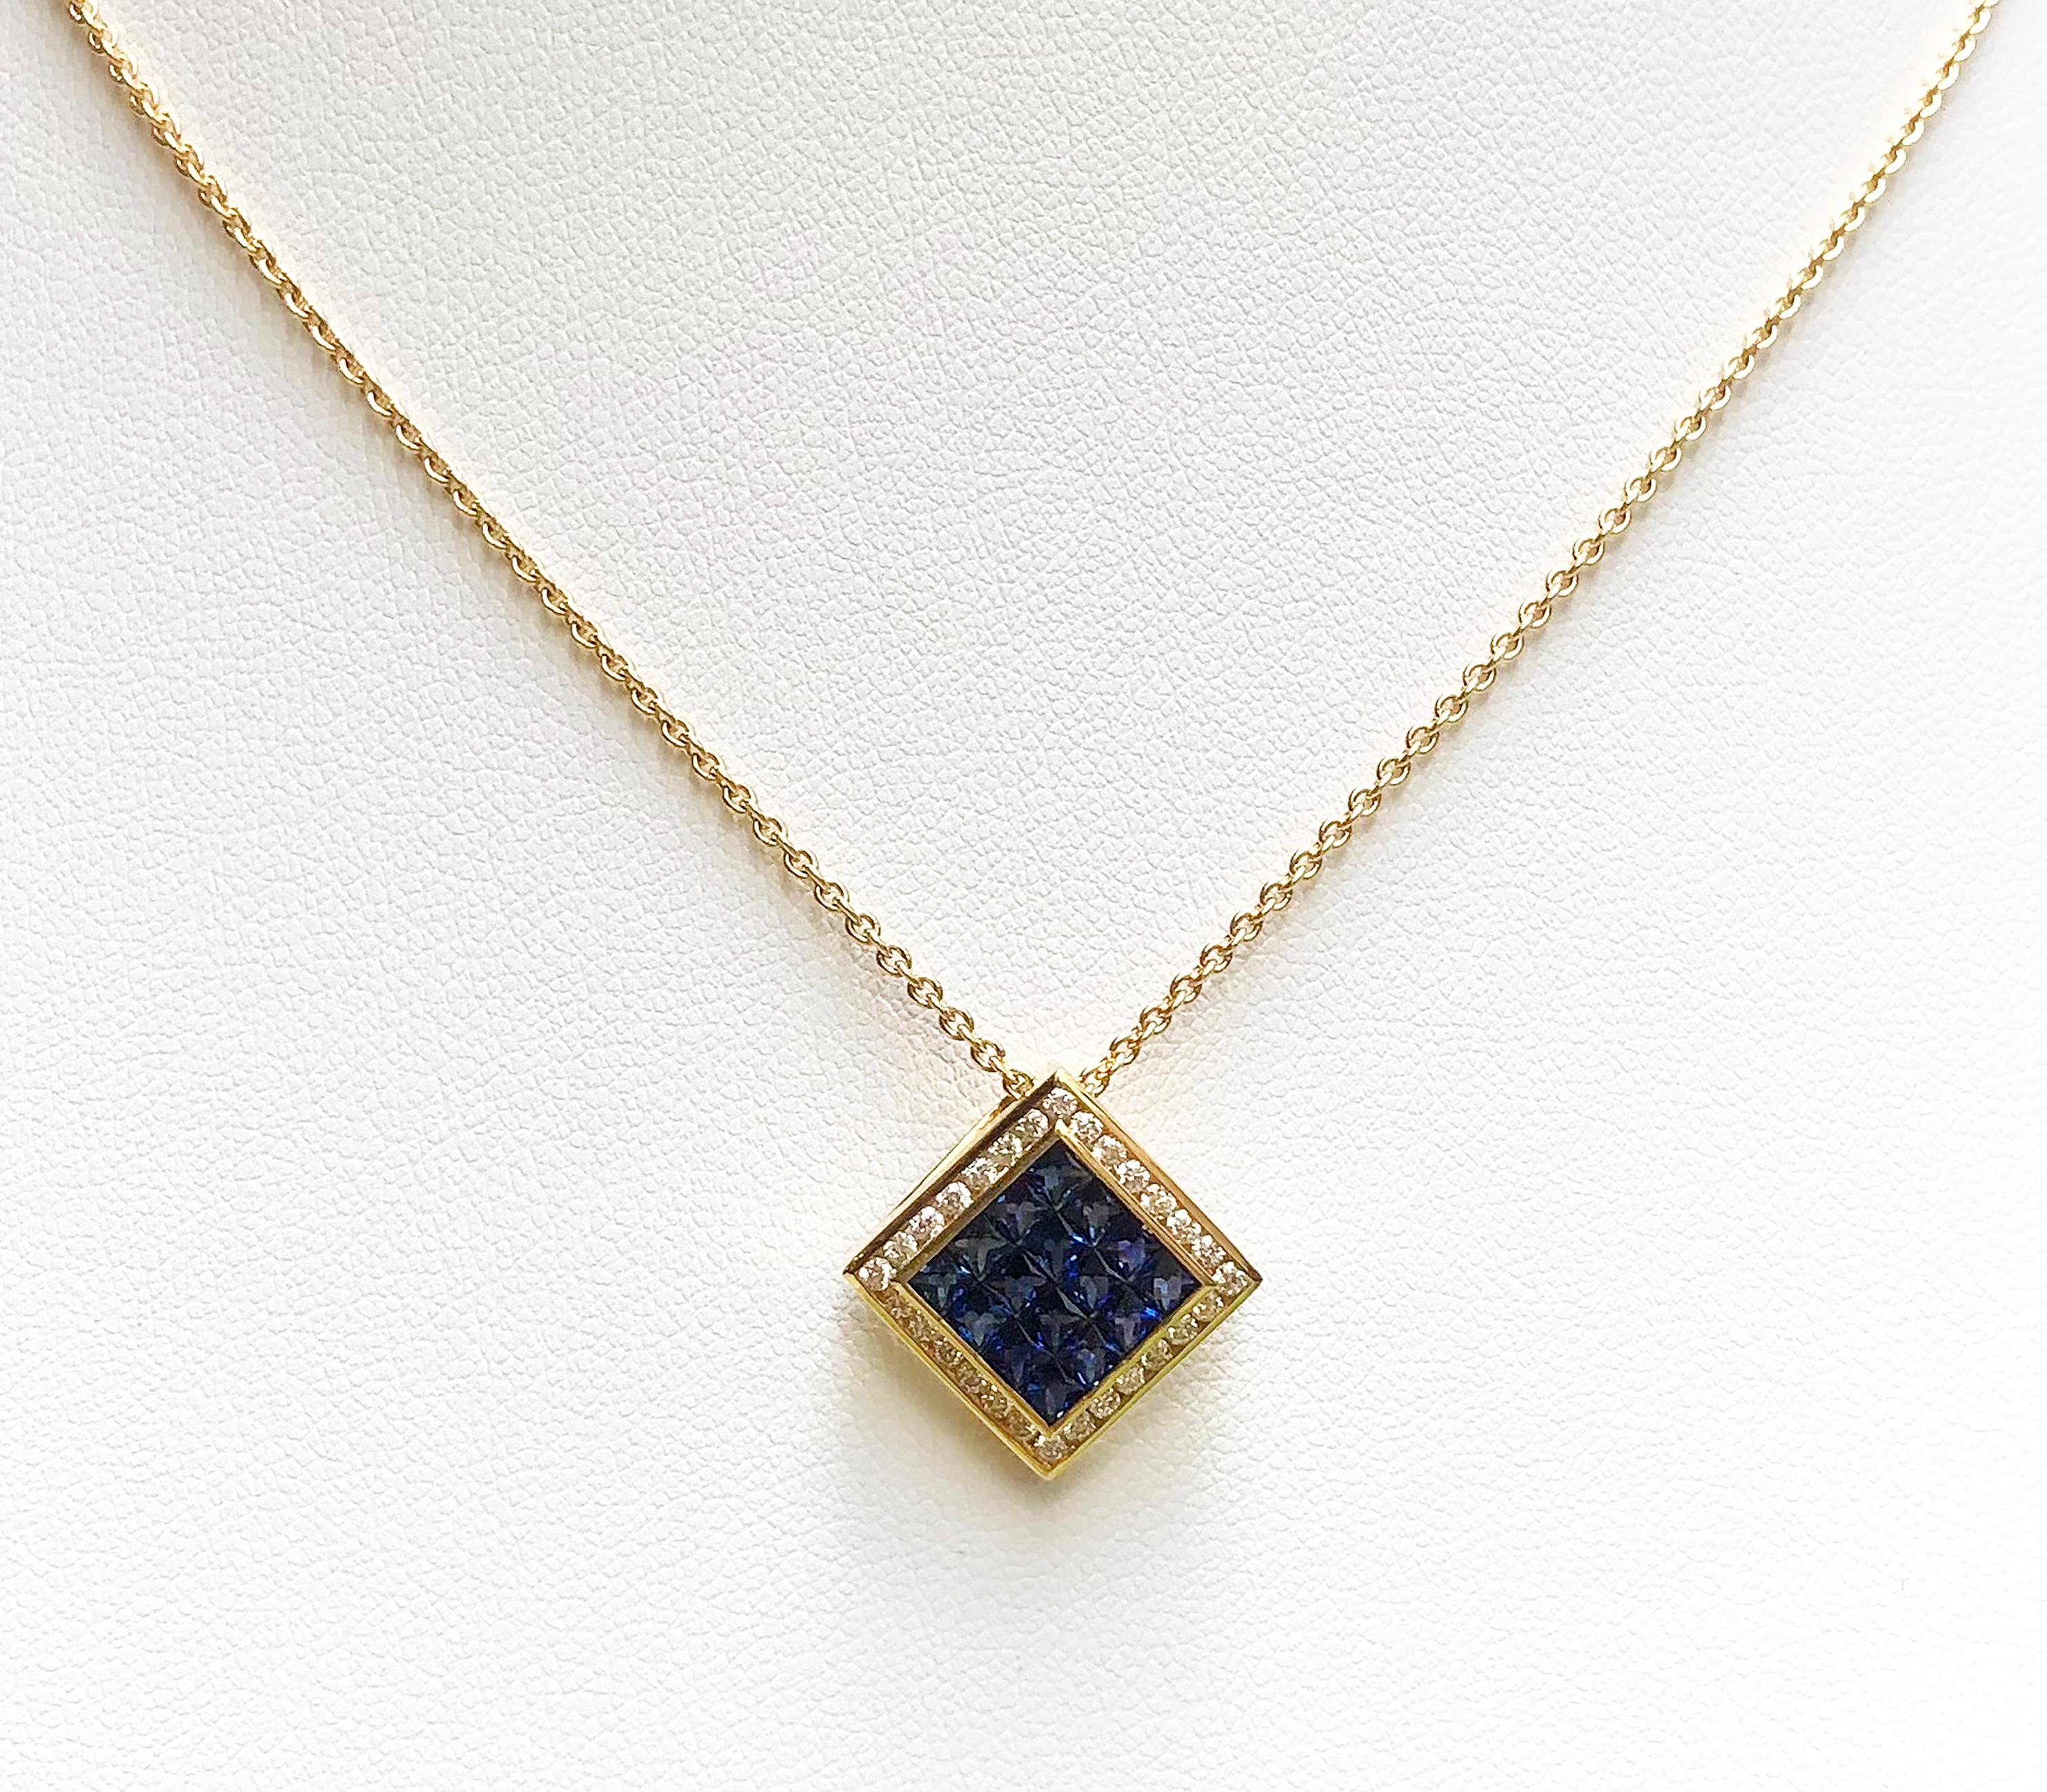 Blue Sapphire 1.80 carats with Diamond 0.33 carat Pendant set in 18 Karat Gold Settings
(chain not included)

Width:  1.8 cm 
Length: 1.8 cm
Total Weight: 3.46 grams

